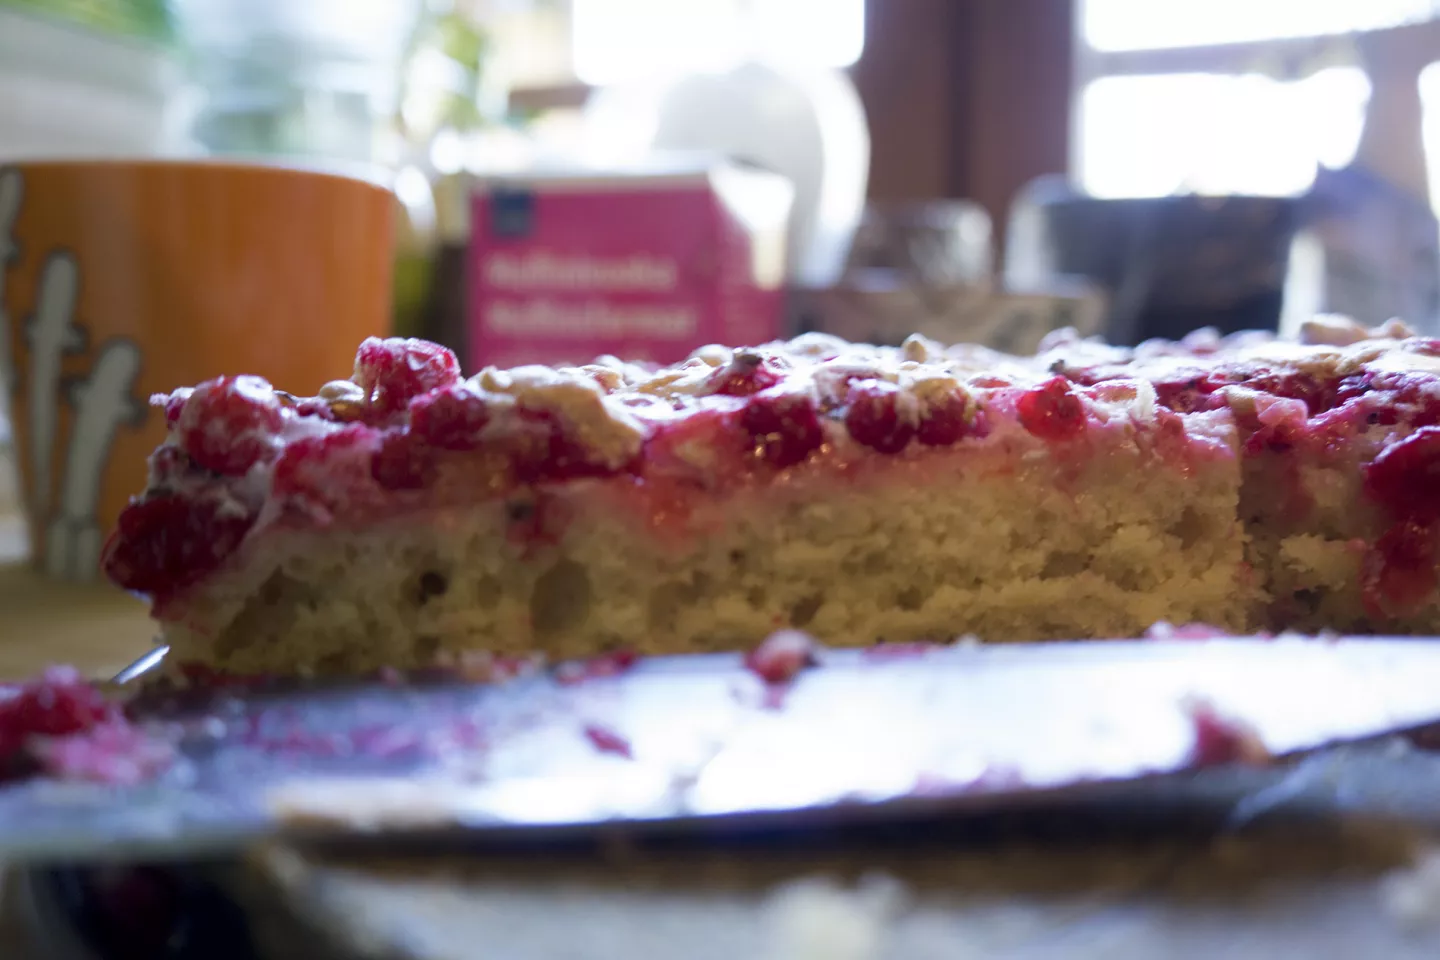 Delicious Ribisel cake made from fresh red currants